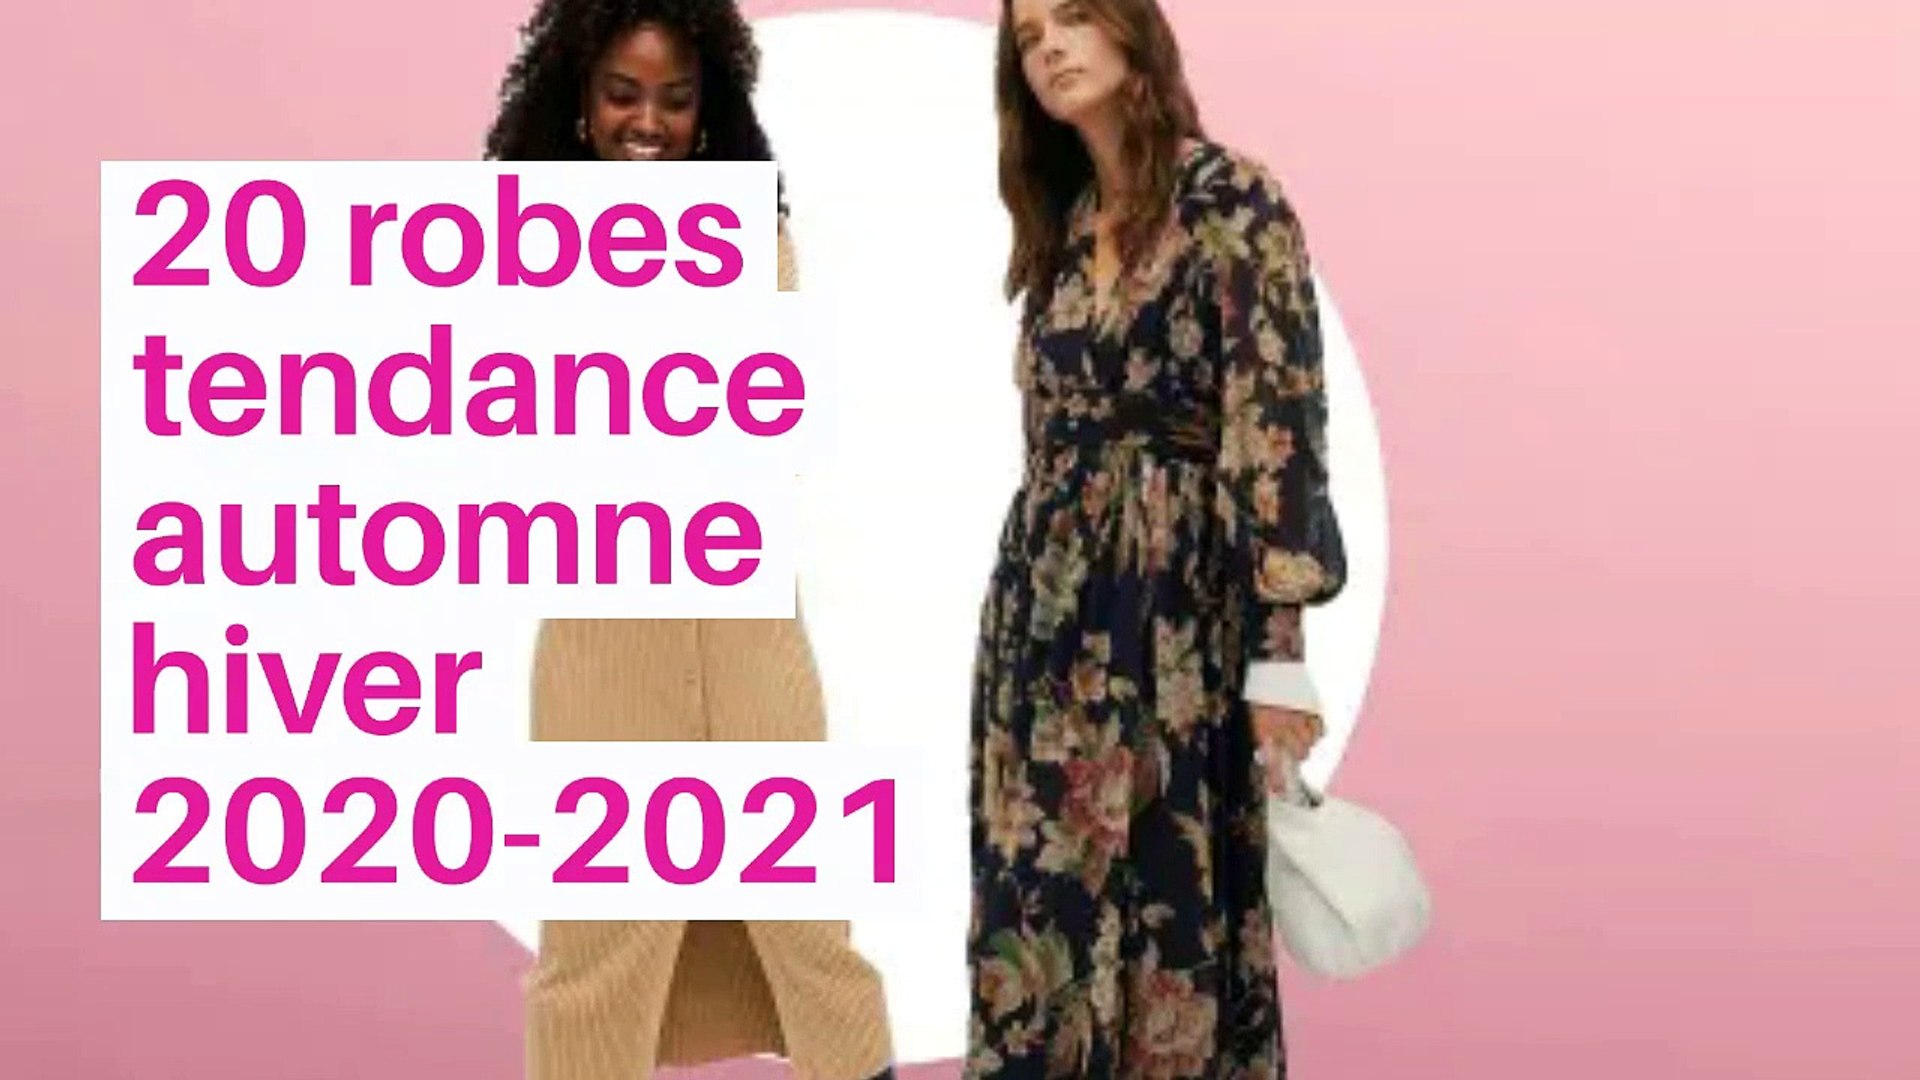 20 robes tendance automne hiver 2020-2021_IN - Vidéo Dailymotion